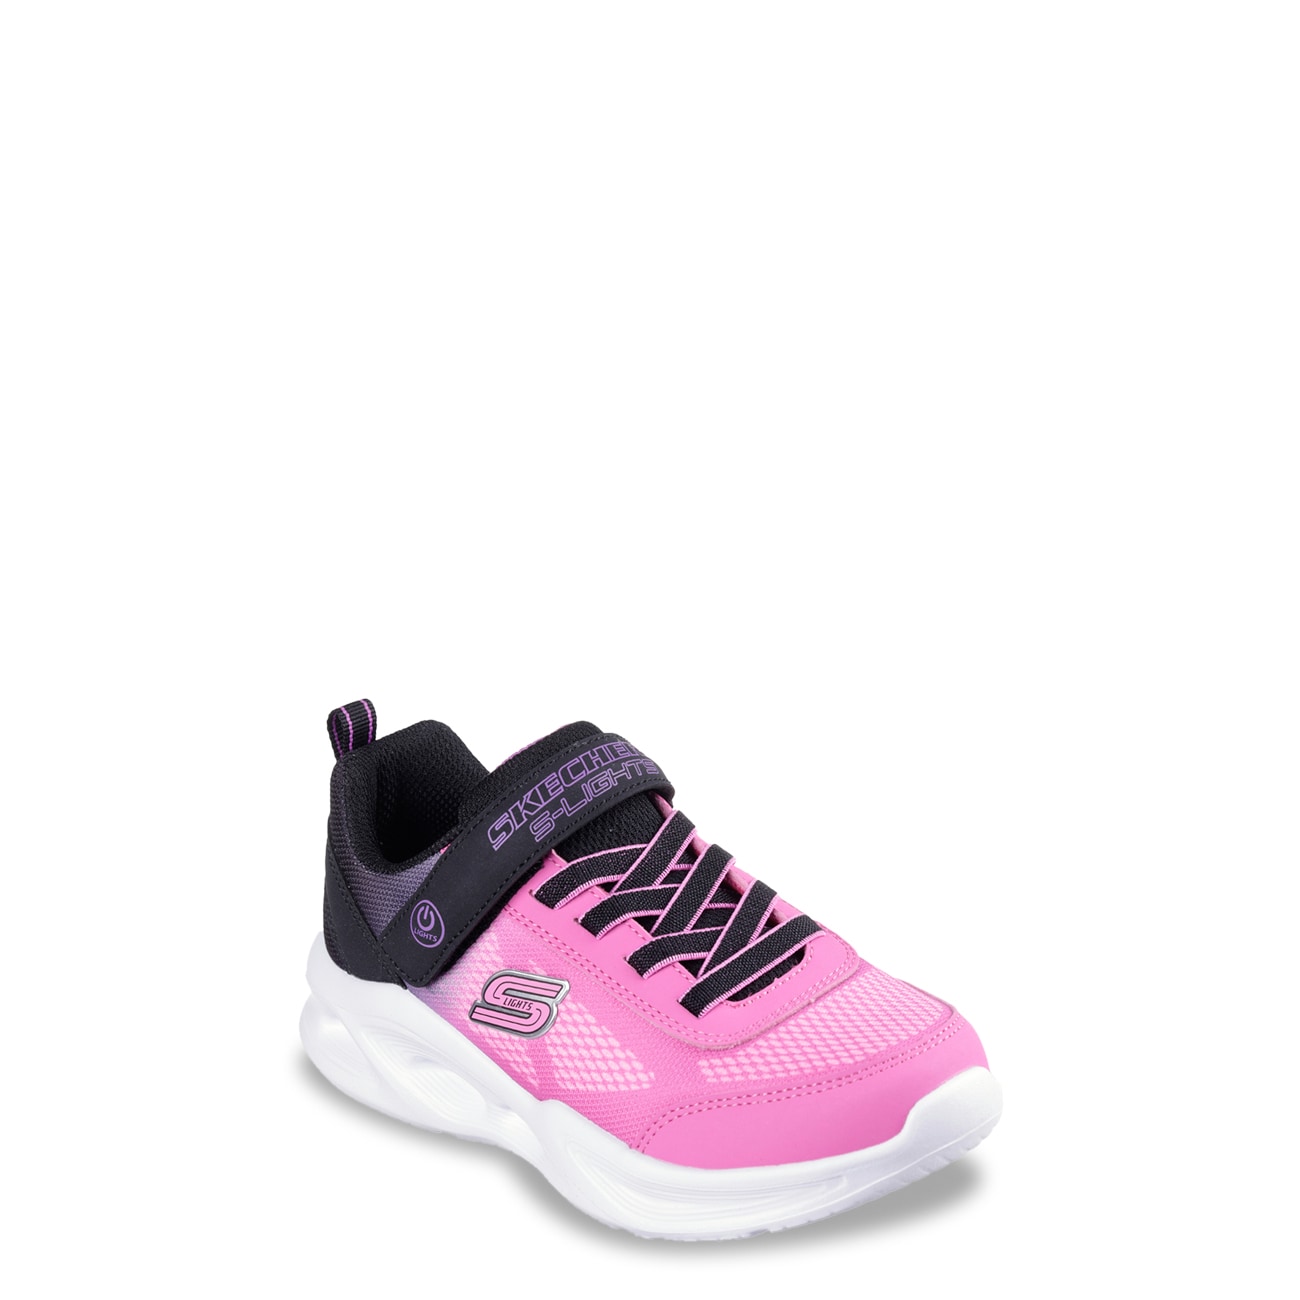 Youth Girls's S-Lights: Sola Glow - Ombre Deluxe Running Shoe